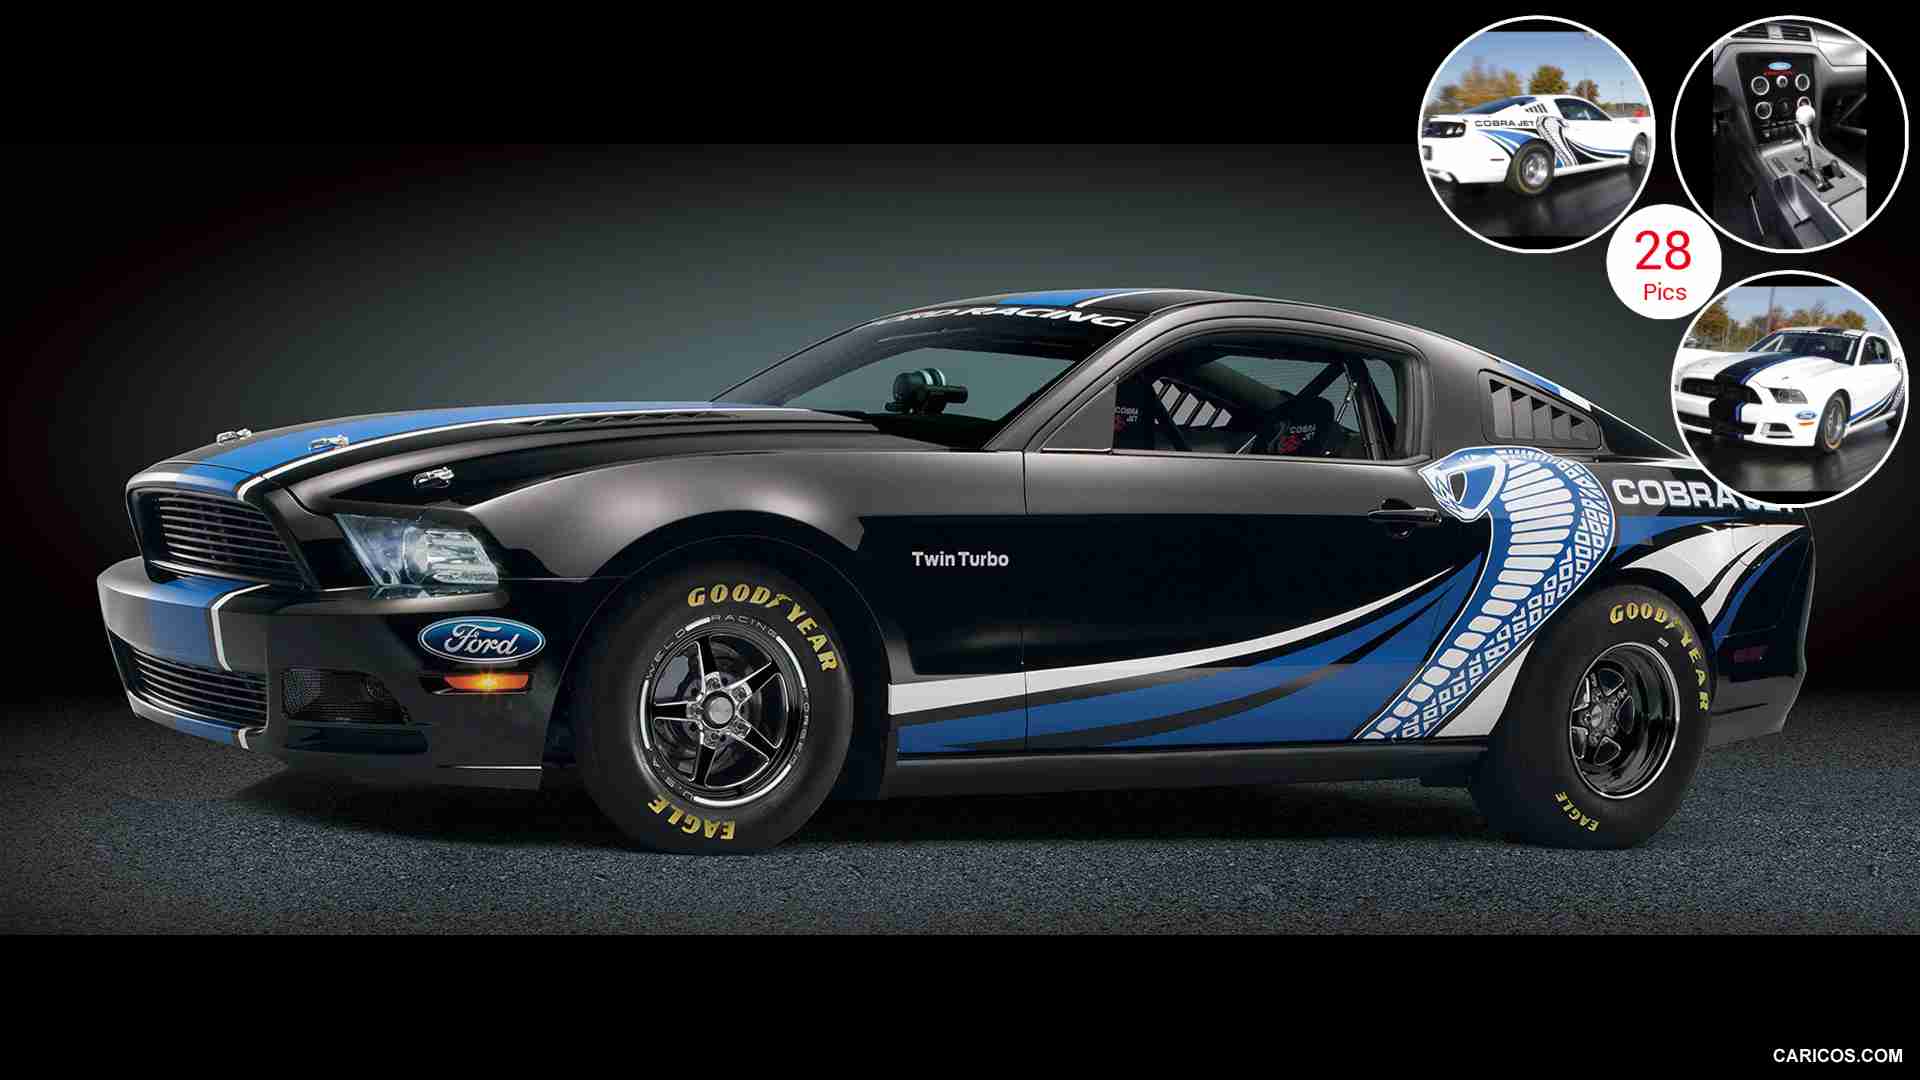 2012 Ford Mustang Cobra Jet Twin-Turbo Concept Black - Side | HD ...